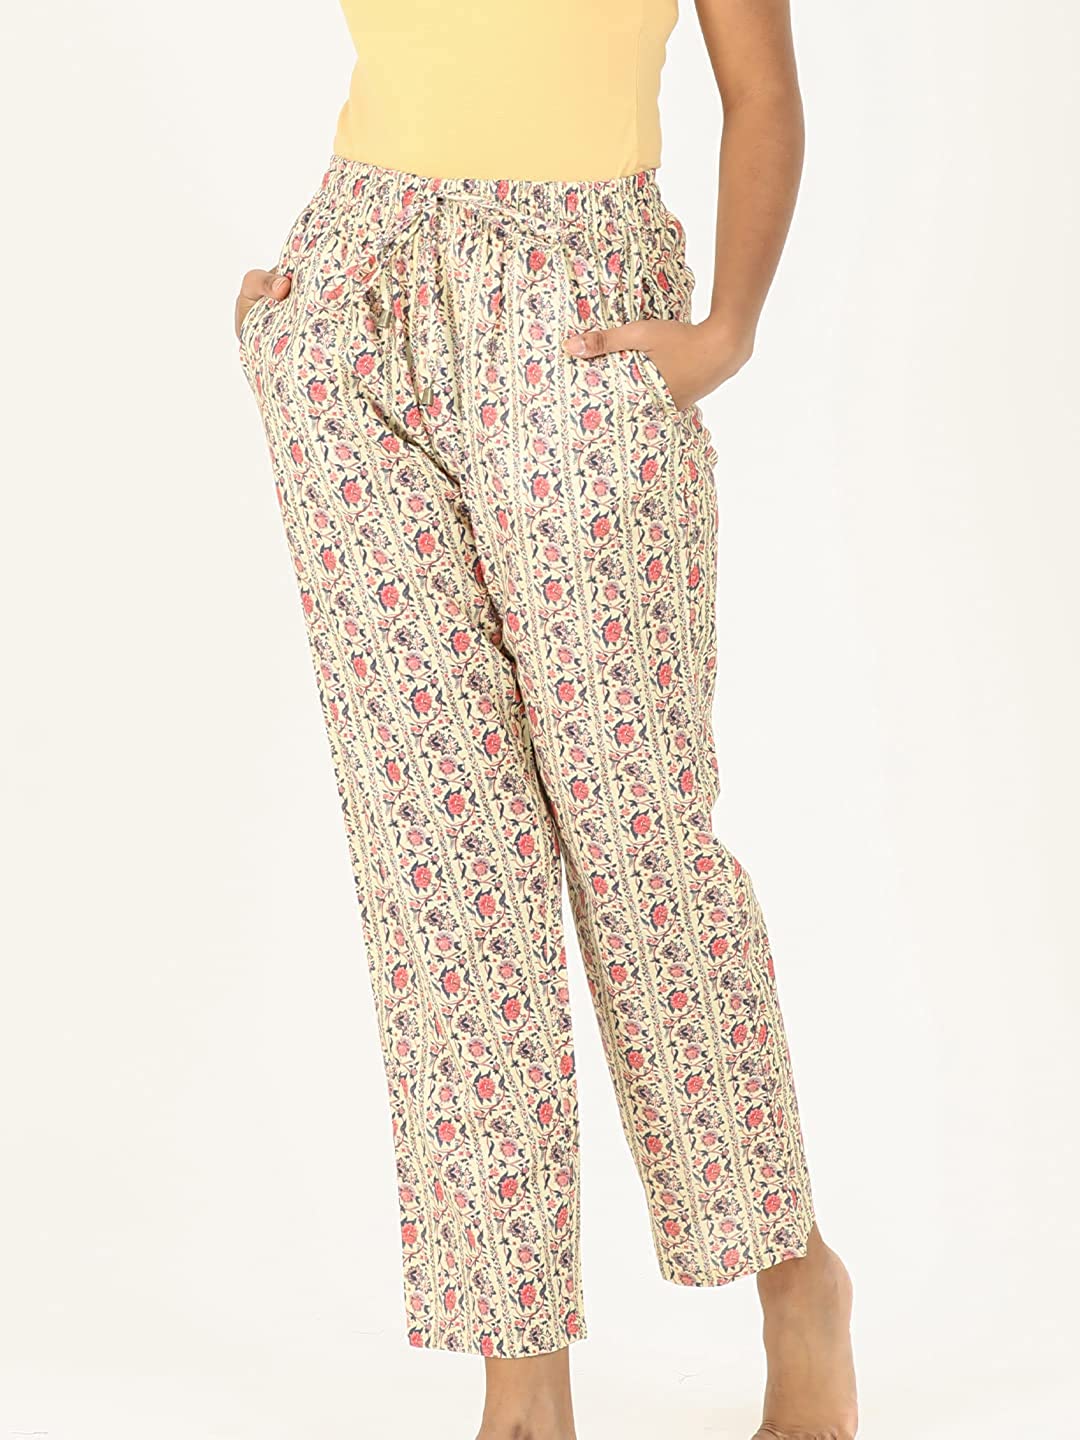 Evolove Loose Fit Pyjamas for Women? with Pockets